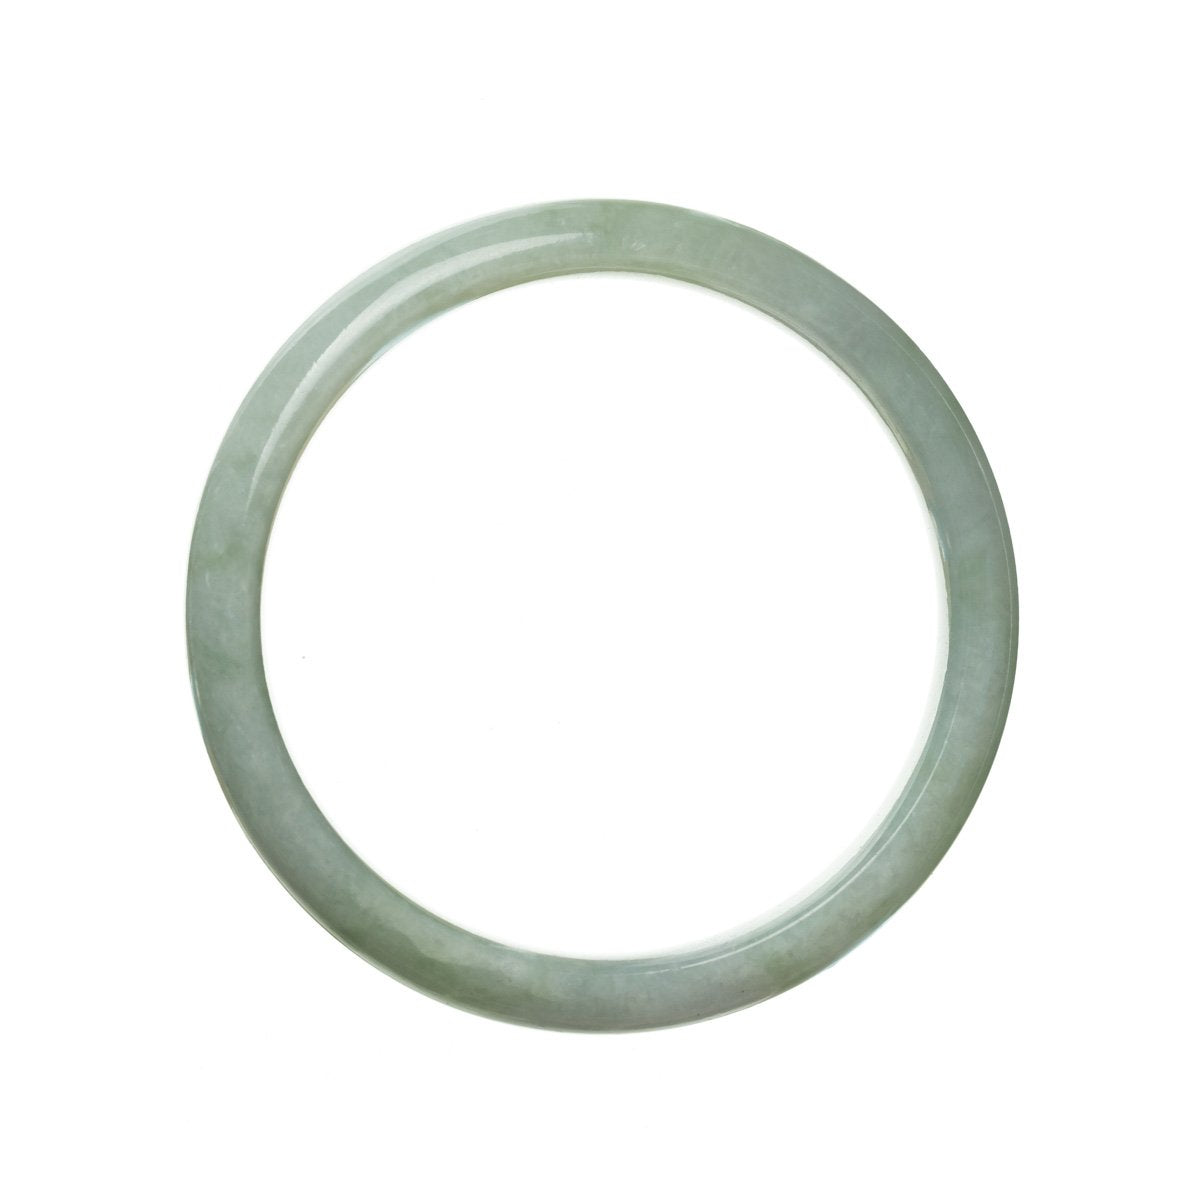 A close-up image of a light green jadeite bracelet with a half moon shape, measuring 57mm in size. The bracelet is made of genuine Type A jadeite and is a product of MAYS GEMS.